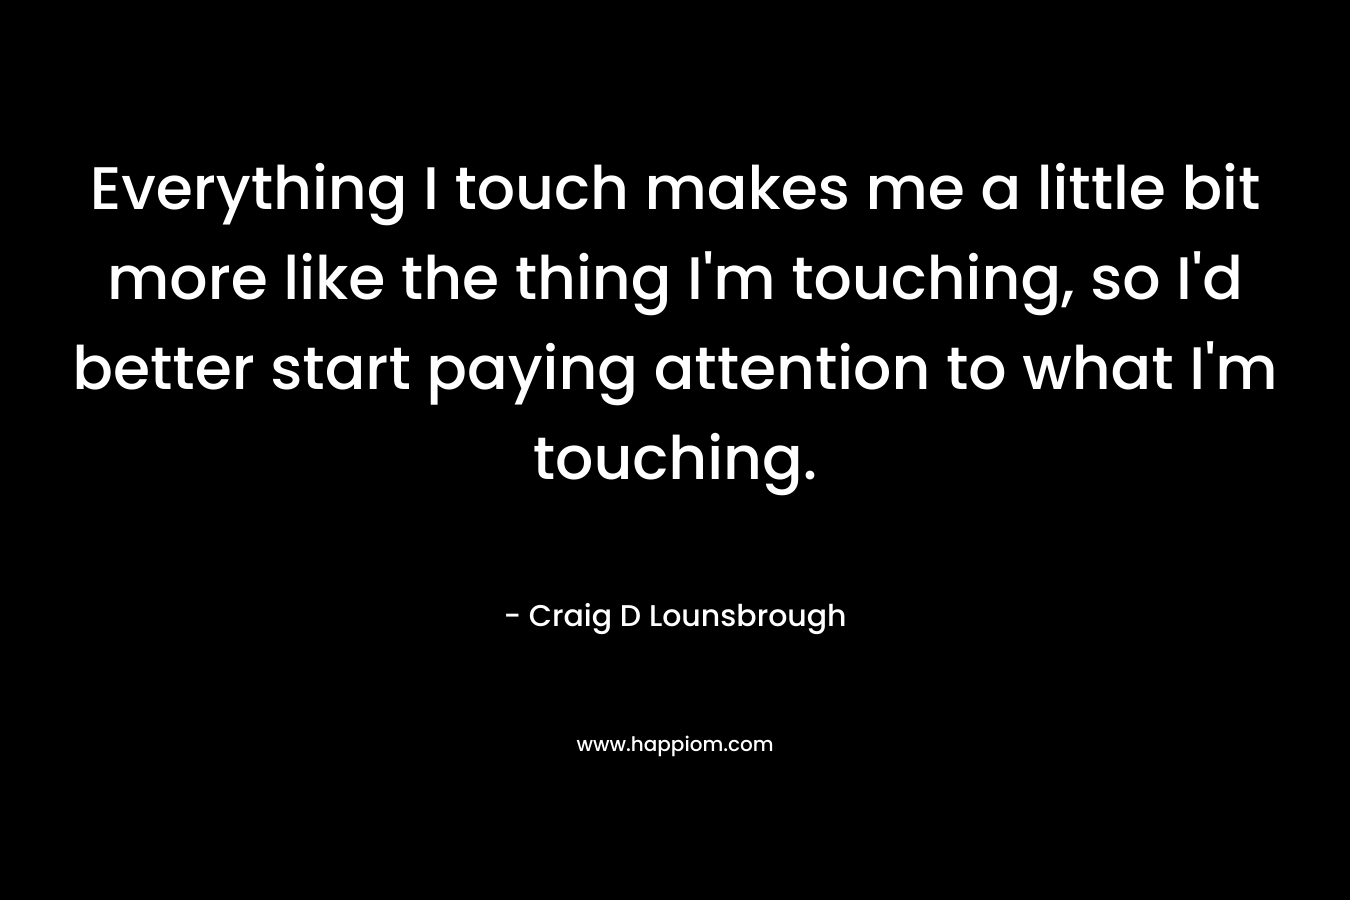 Everything I touch makes me a little bit more like the thing I'm touching, so I'd better start paying attention to what I'm touching.